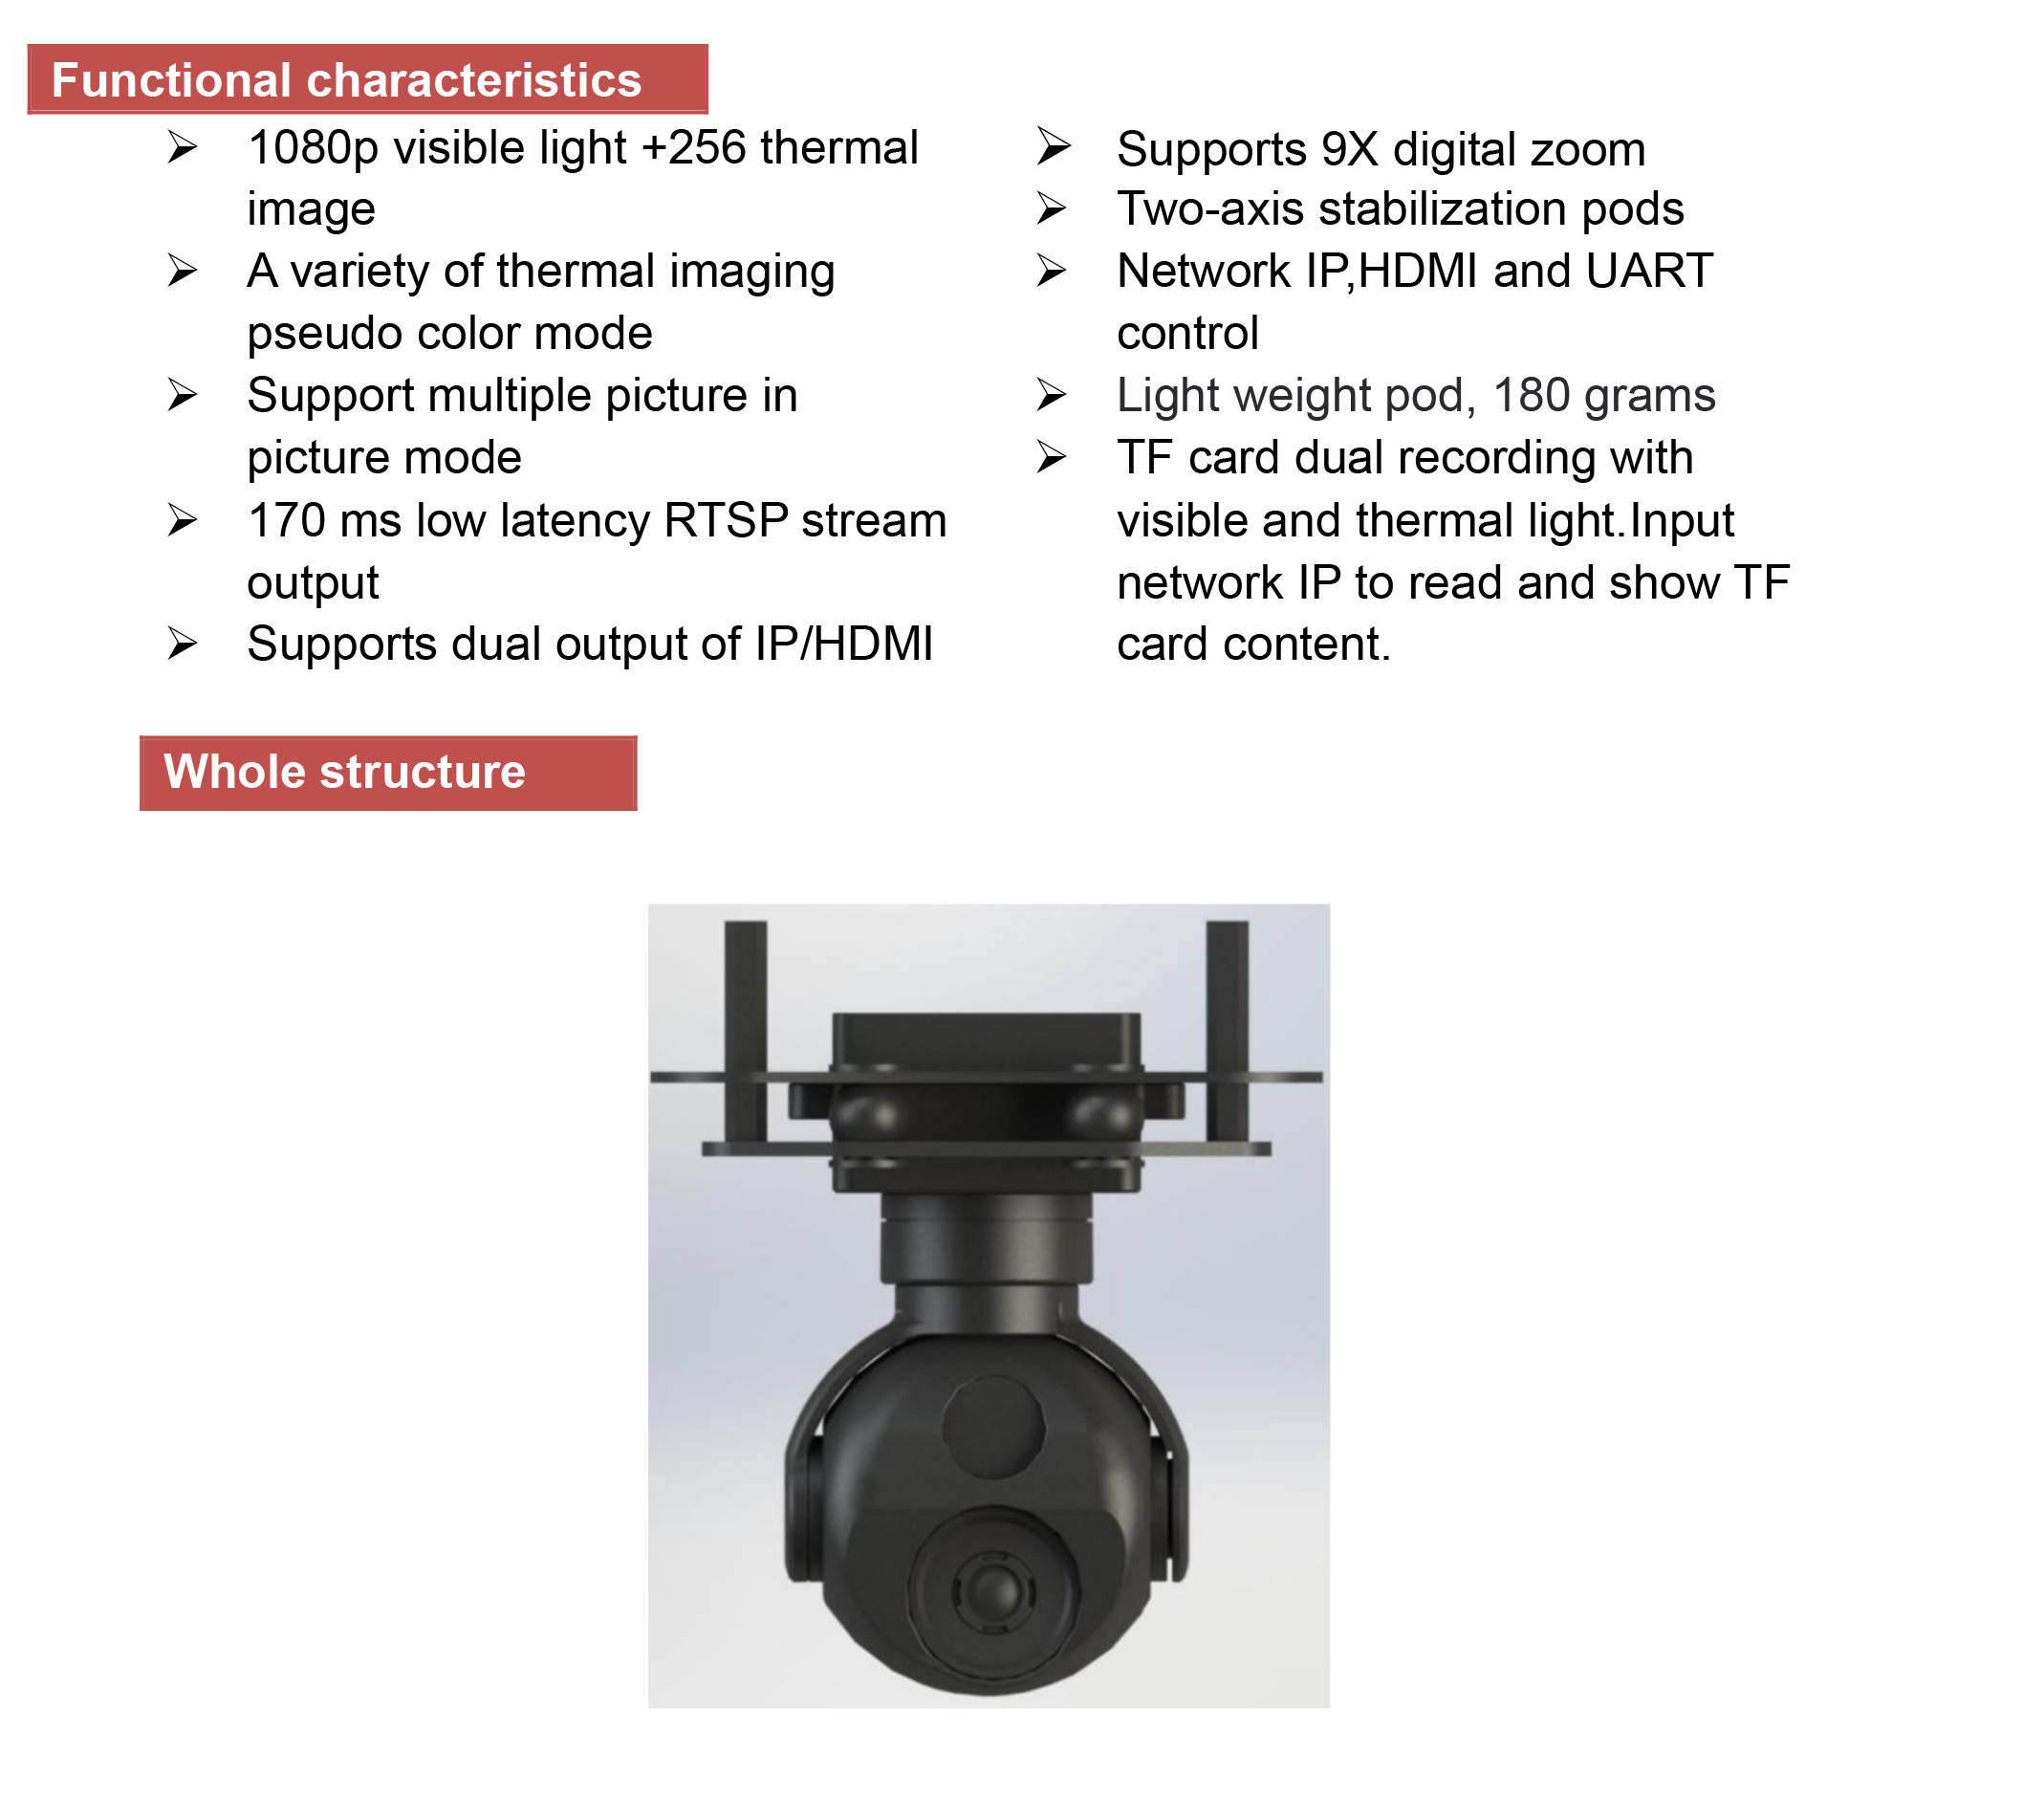 DYK290G207 1080P visible light +256 thermal imaging dual light with dual output 180g small pod camera